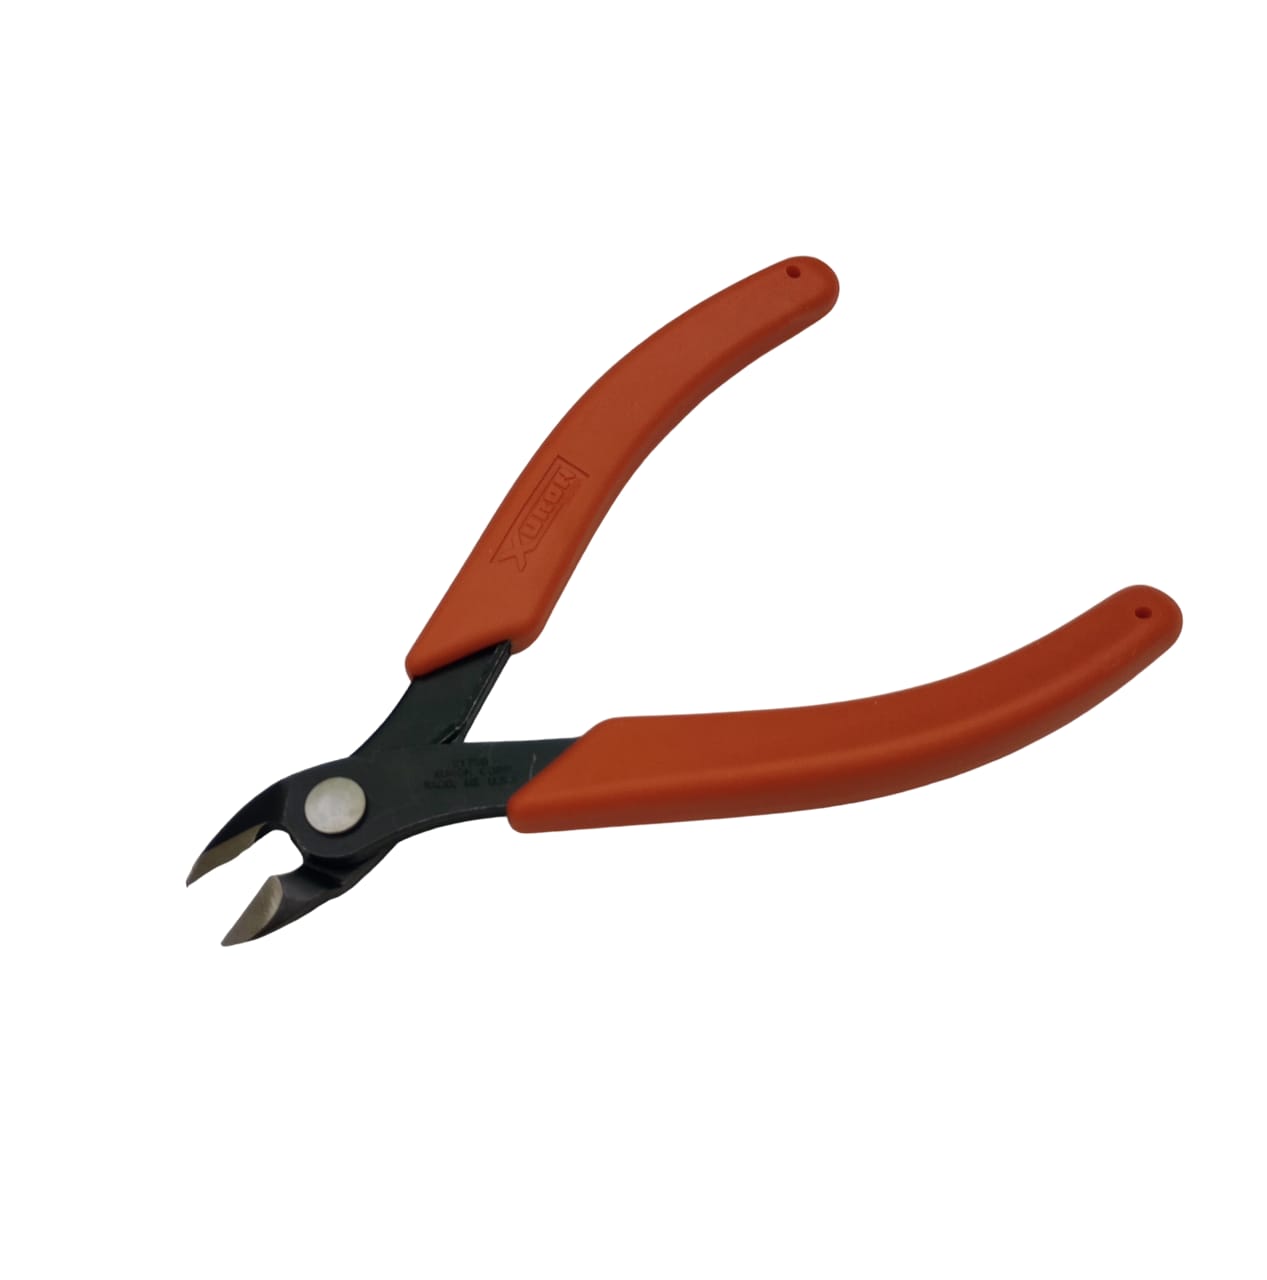 Xuron - Top Quality Shears & Pliers - Made in USA